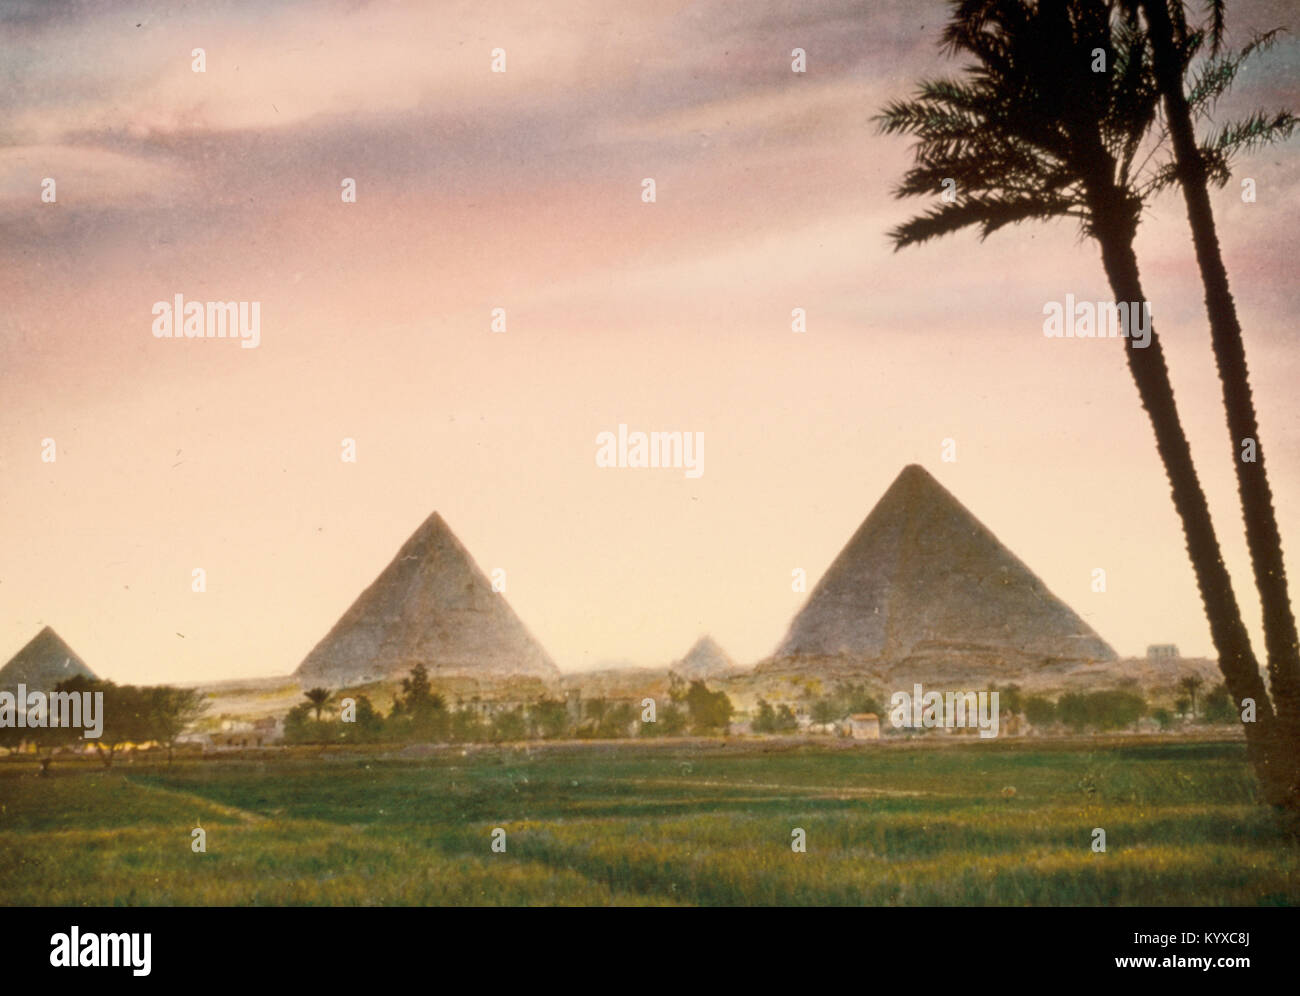 Pyramids. Pyramids silhouetted against strong evening glow Stock Photo